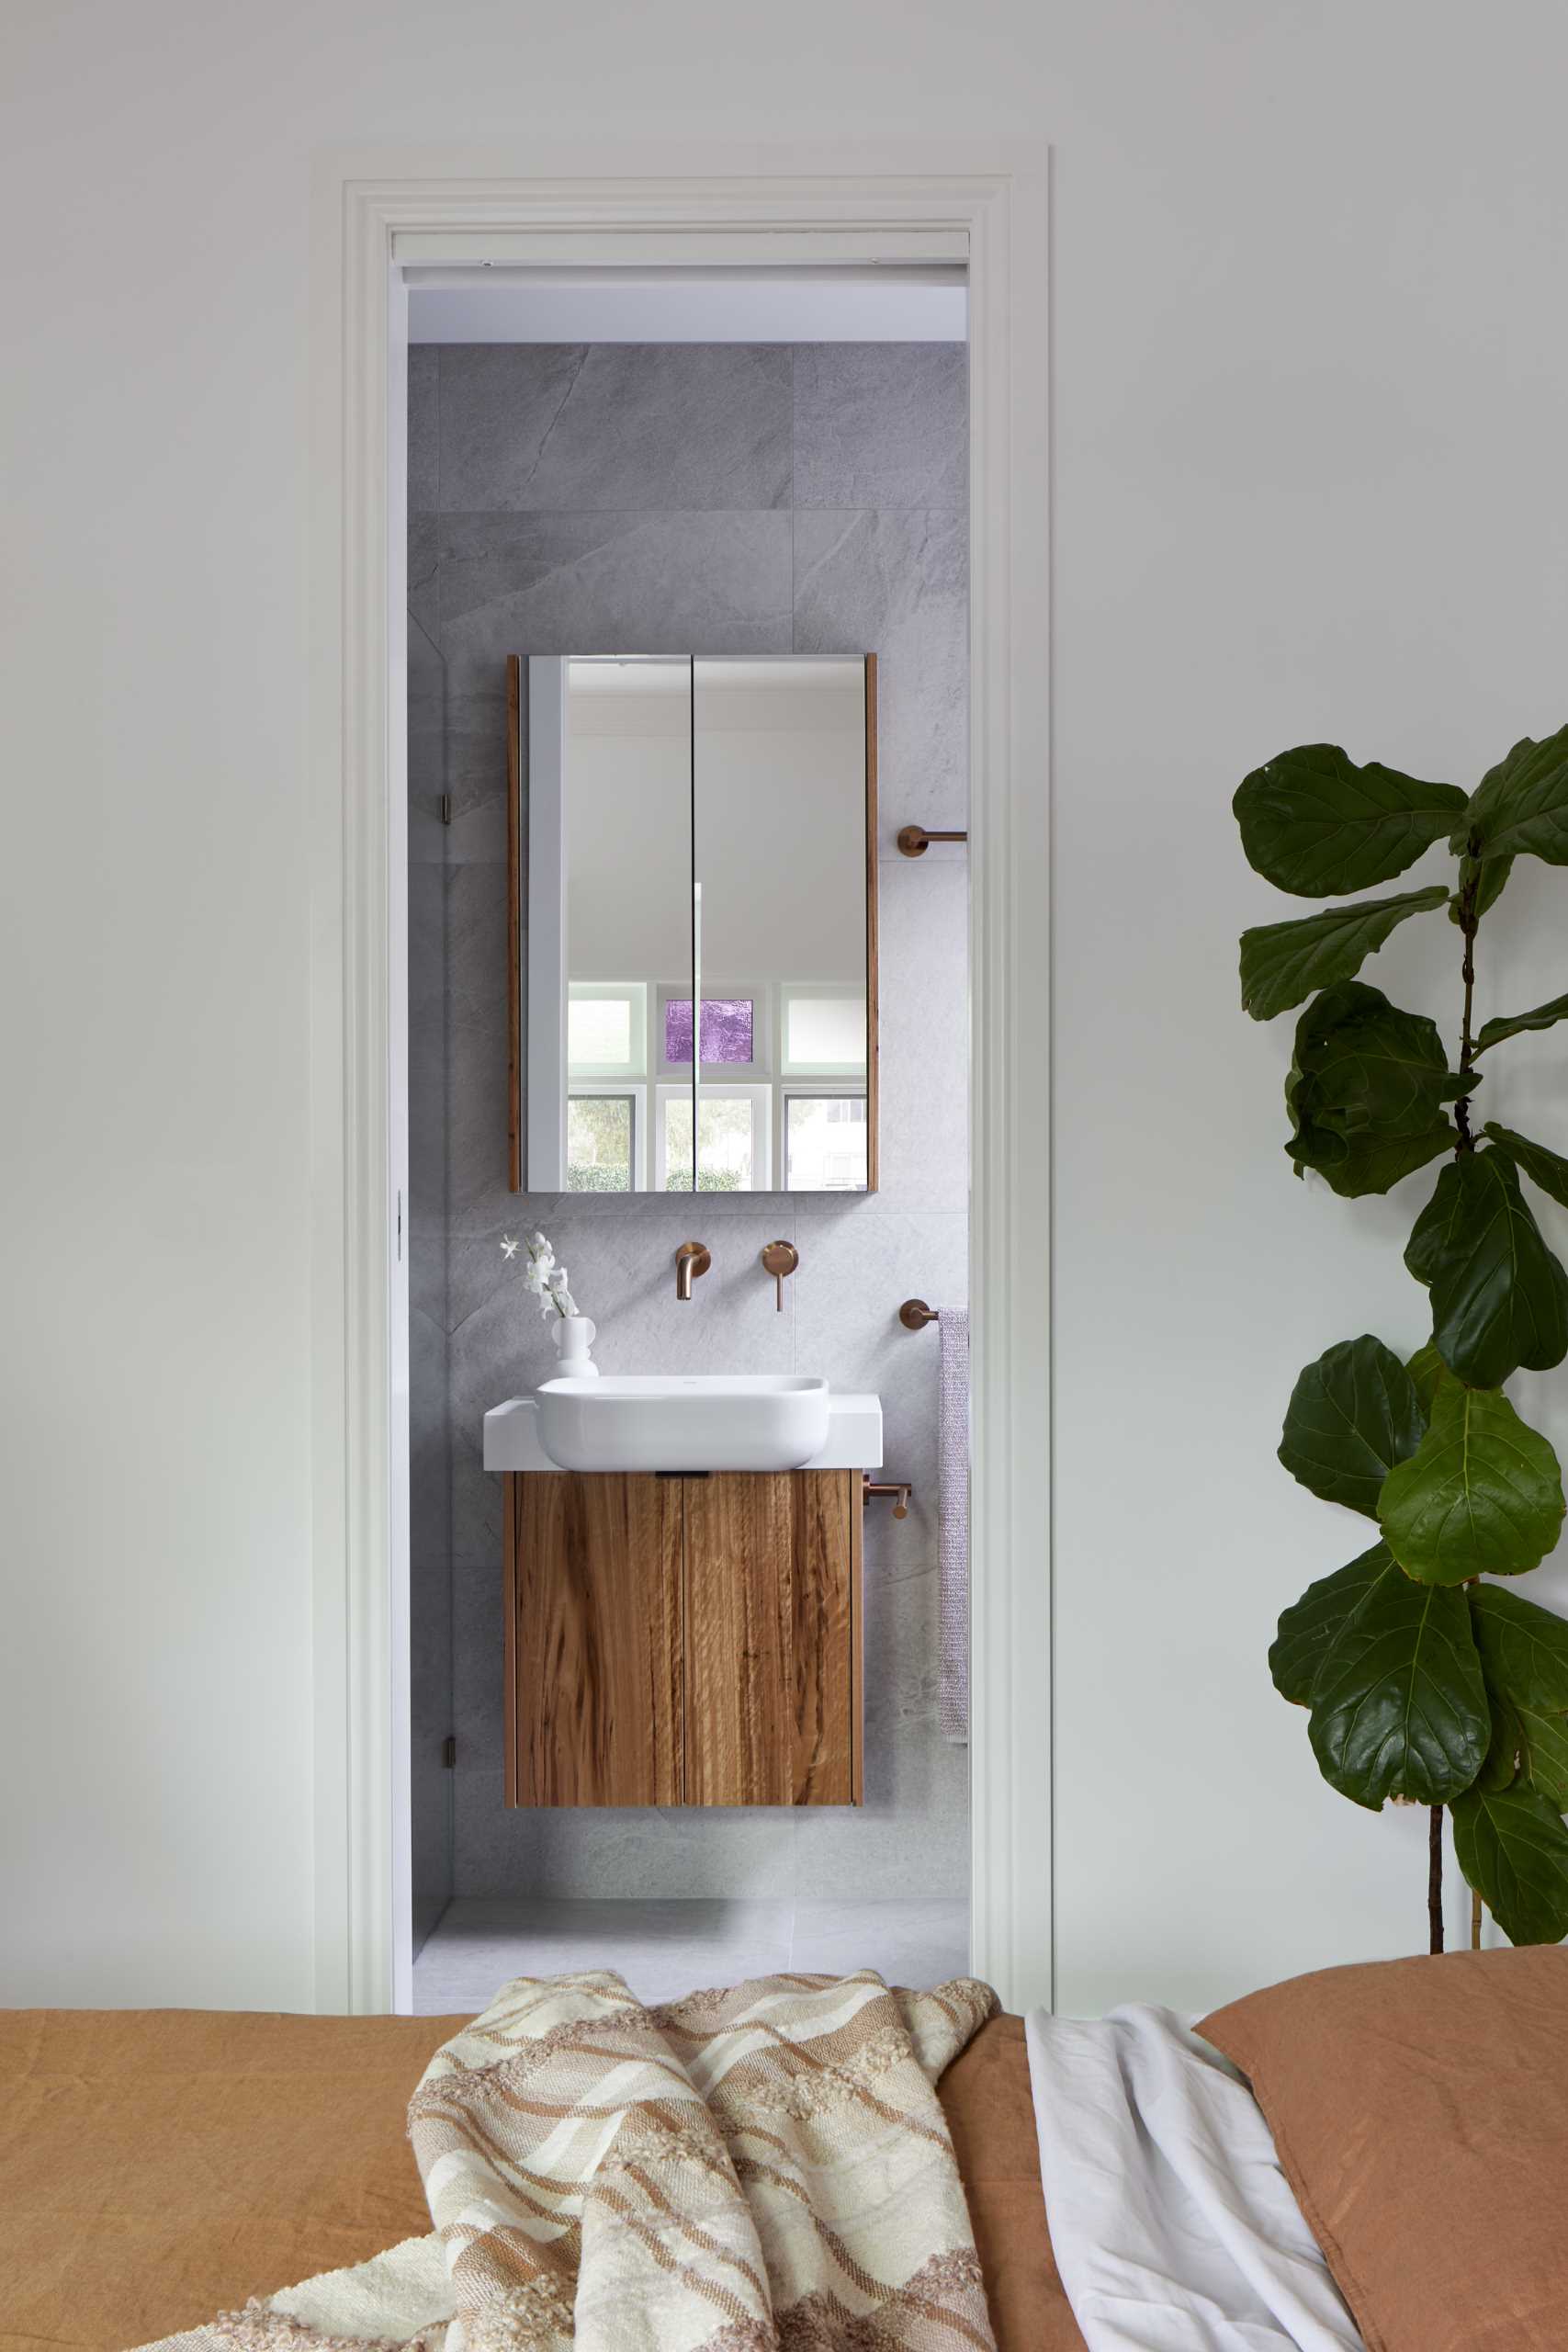 This modern en-suite bathroom has a single vanity with a glass-enclosed walk-in shower on one side and a freestanding bathtub with a shelving niche on the other.